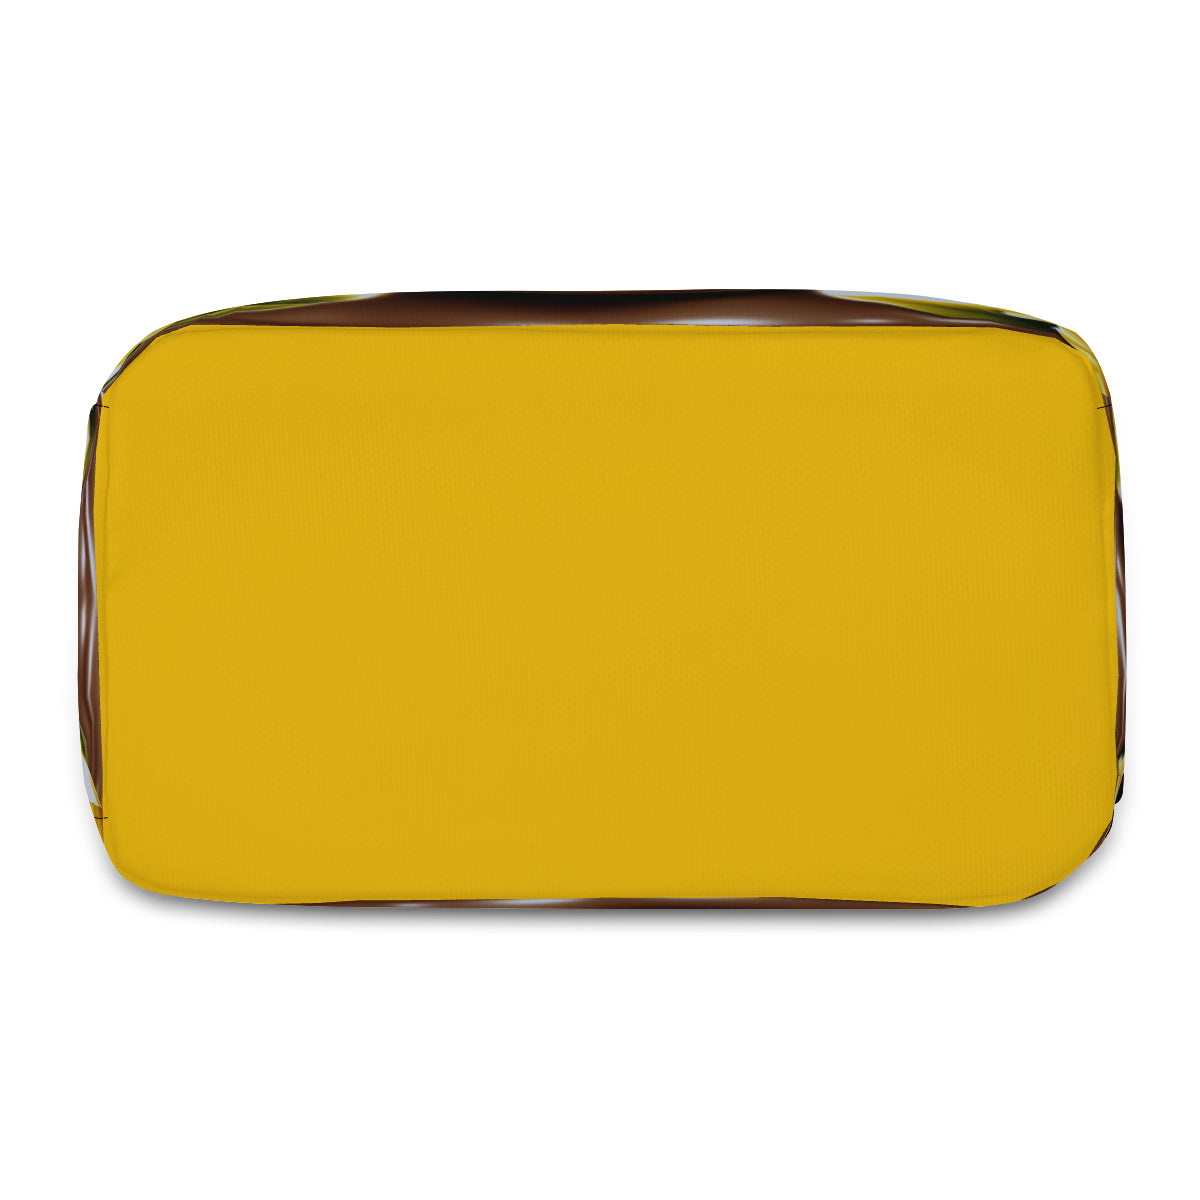 a yellow suitcase sitting on a white surface 